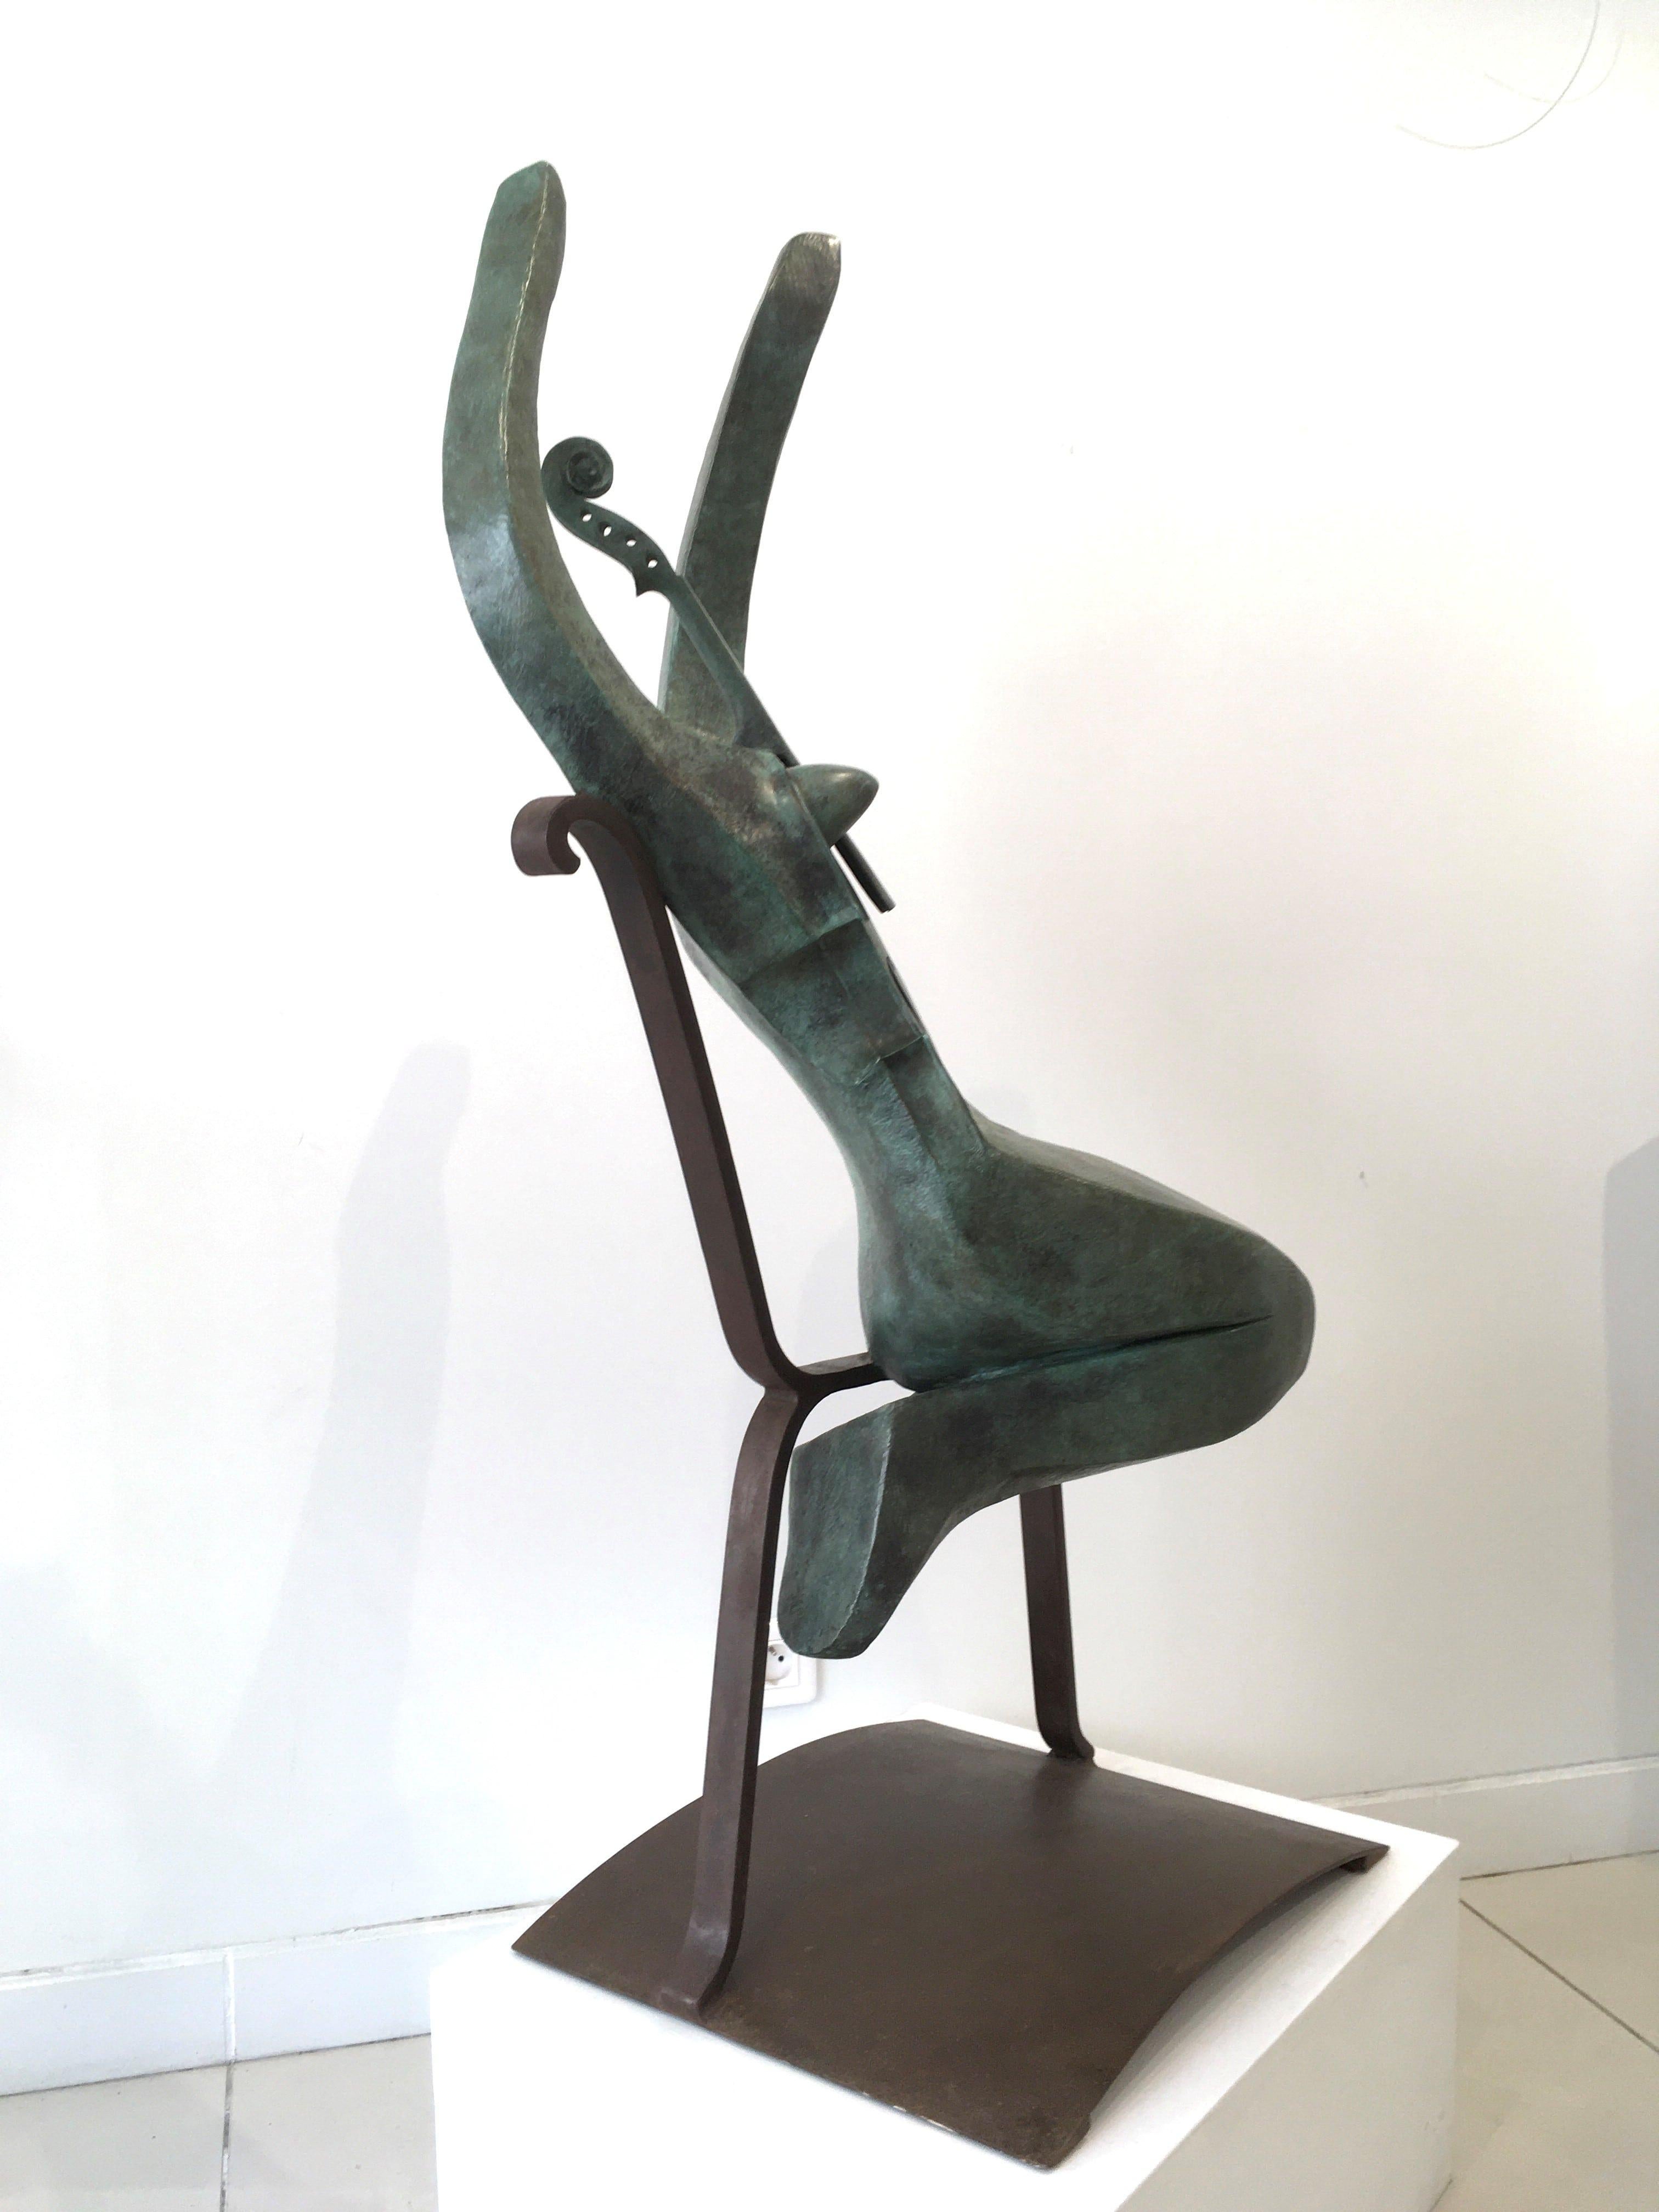 Bronze sculpture, green patina, 120 cm x 60 cm x 43 cm (including the 50 x 53 cm base).
Limited edition of 8 + 4 artist’s proofs. 
The base and the chair are made of patinated metal.